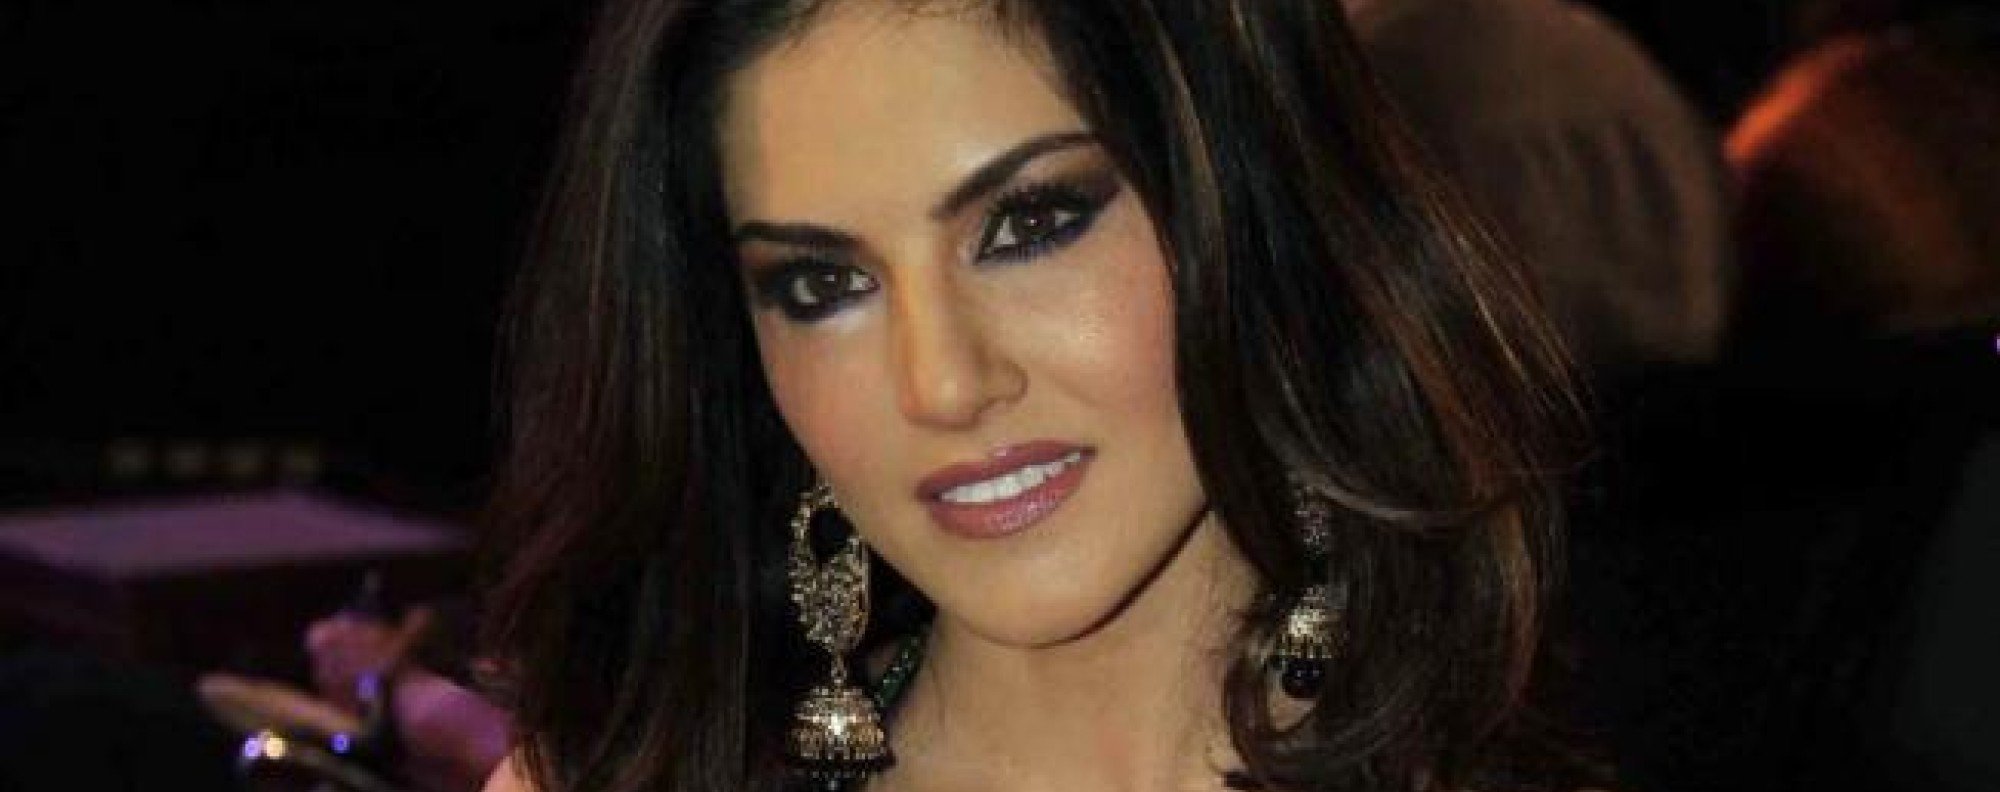 Xx Sexy Rape - Rape crisis in India leads to calls for porn star Sunny Leone to be jailed  | South China Morning Post